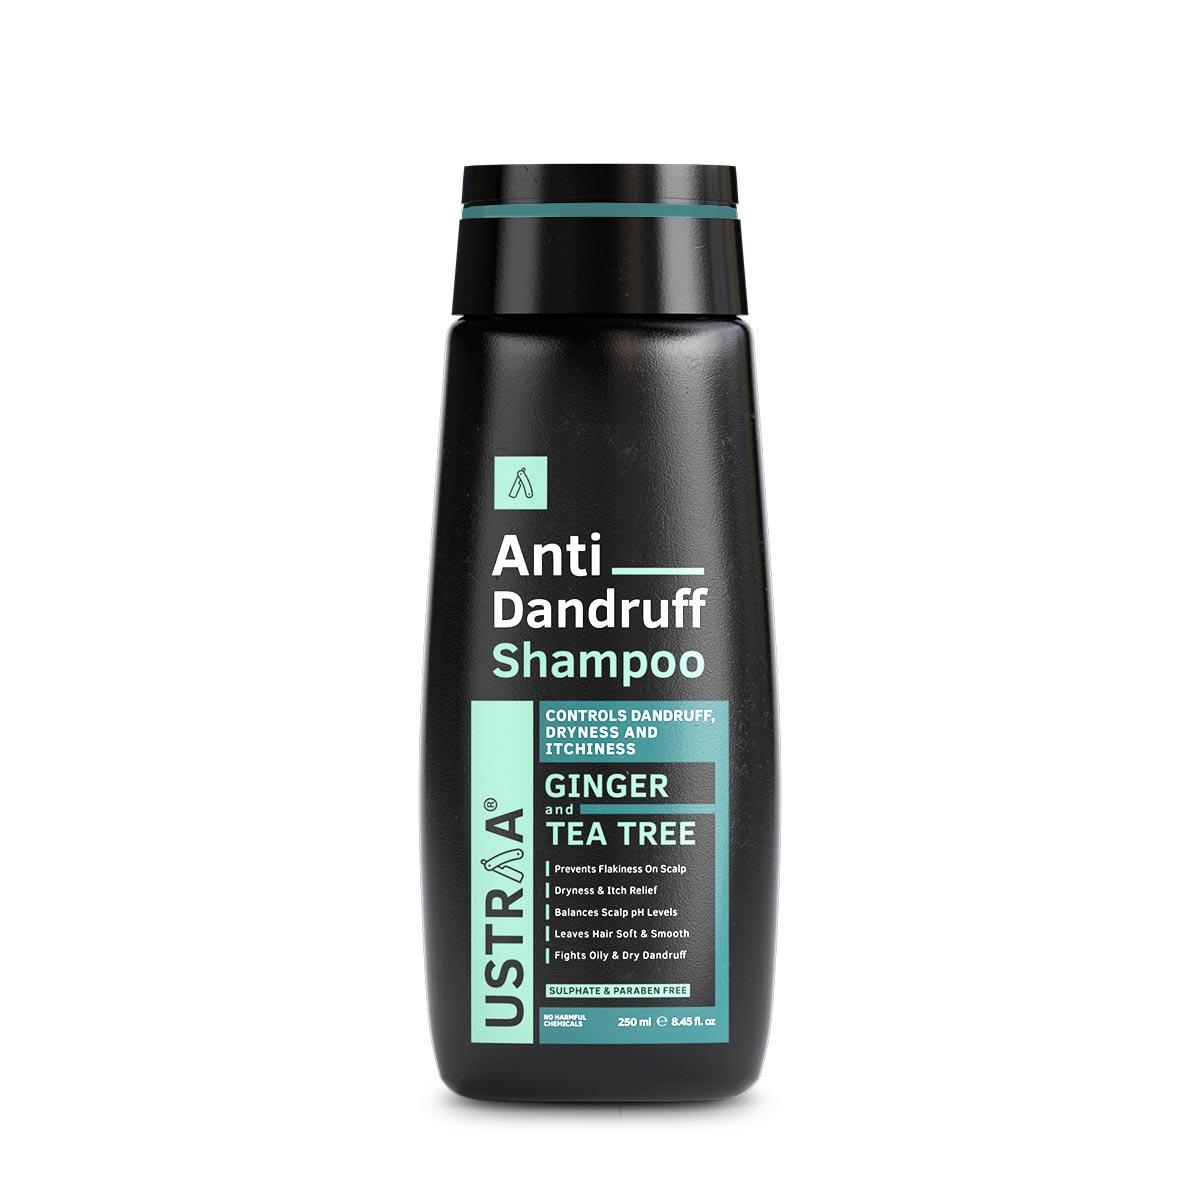 Ustraa Anti Dandruff Hair Shampoo 250 ml - A shampoo for men with Ginger and Tea Tree - Fights Dandruff, Dryness & Prevents flaking on the scalp